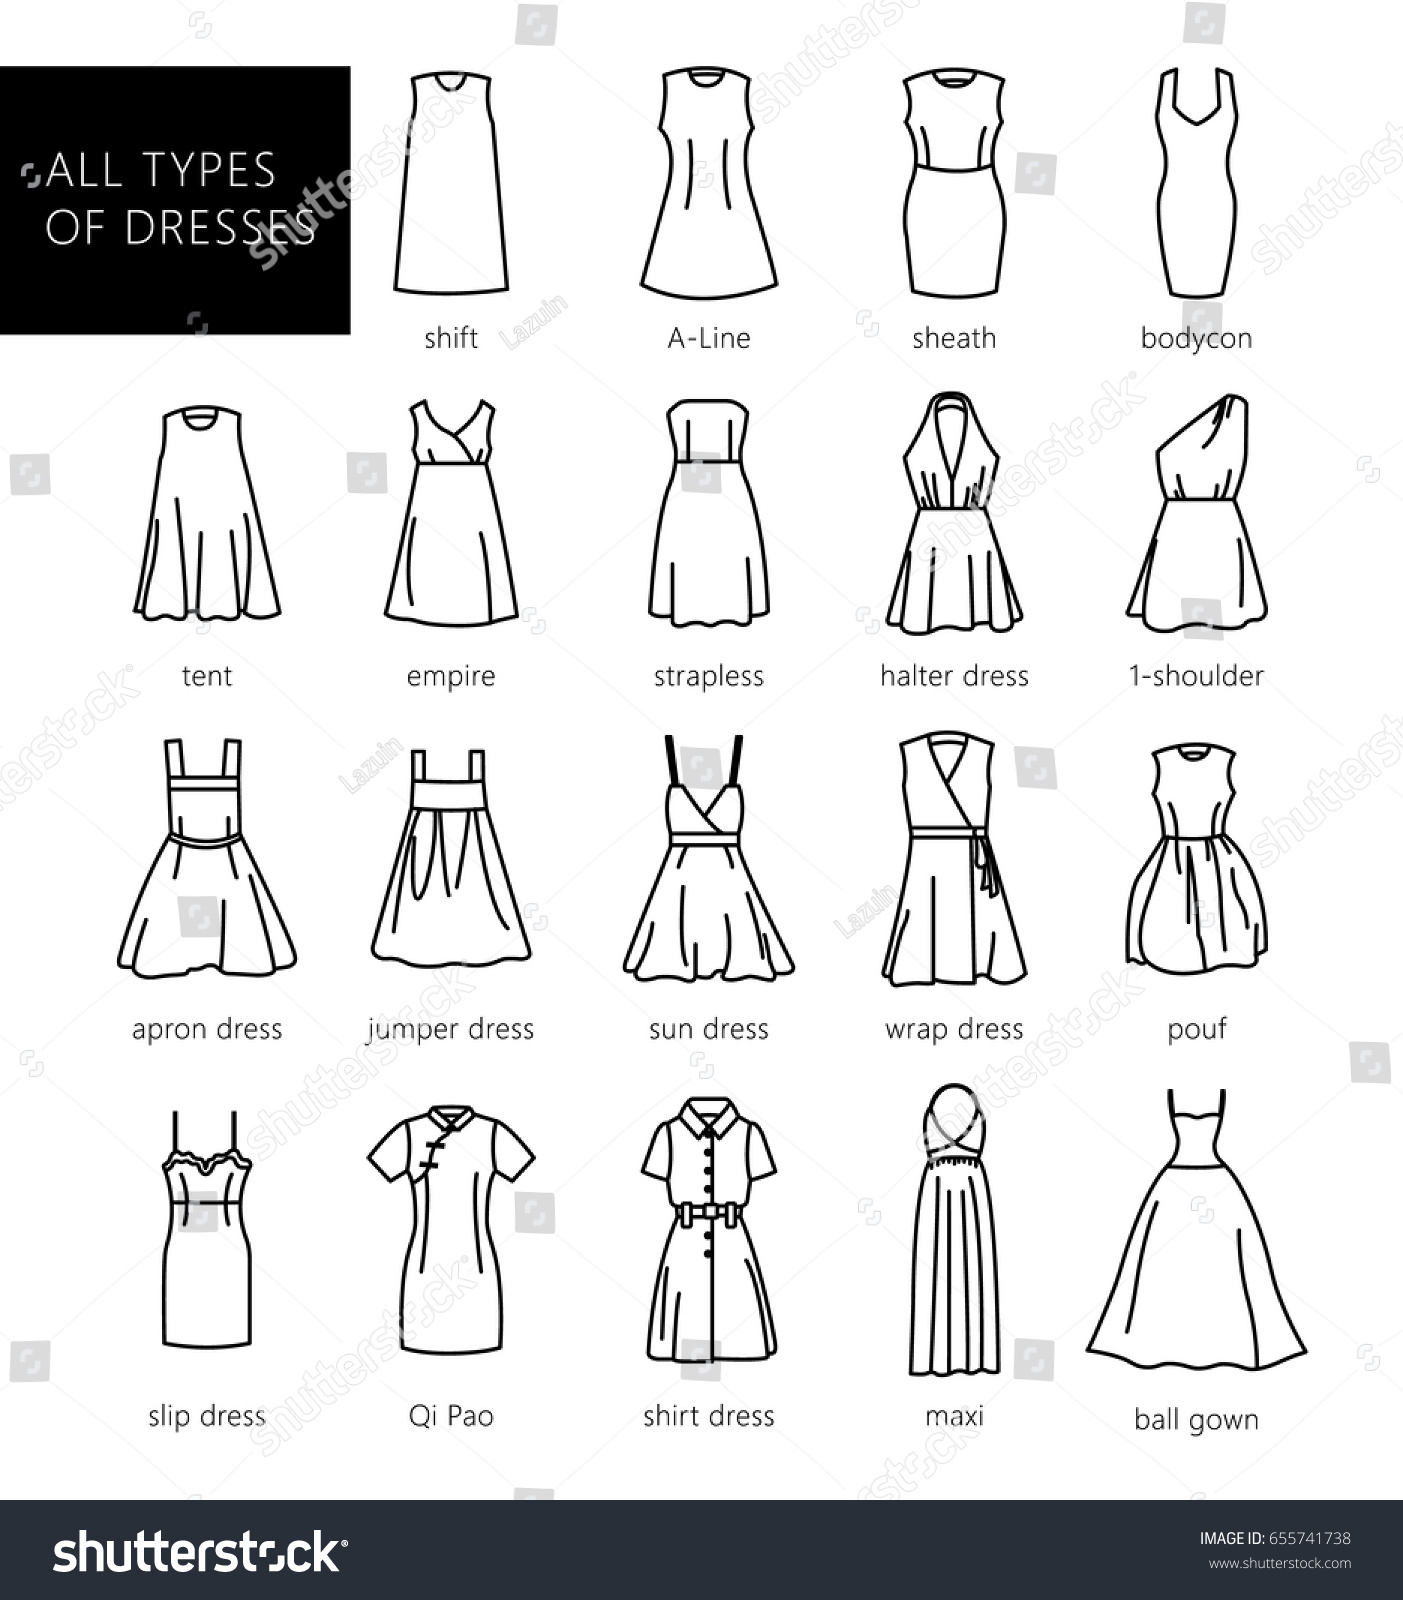 Dress Types For Women - Fashion Outfits Dresses